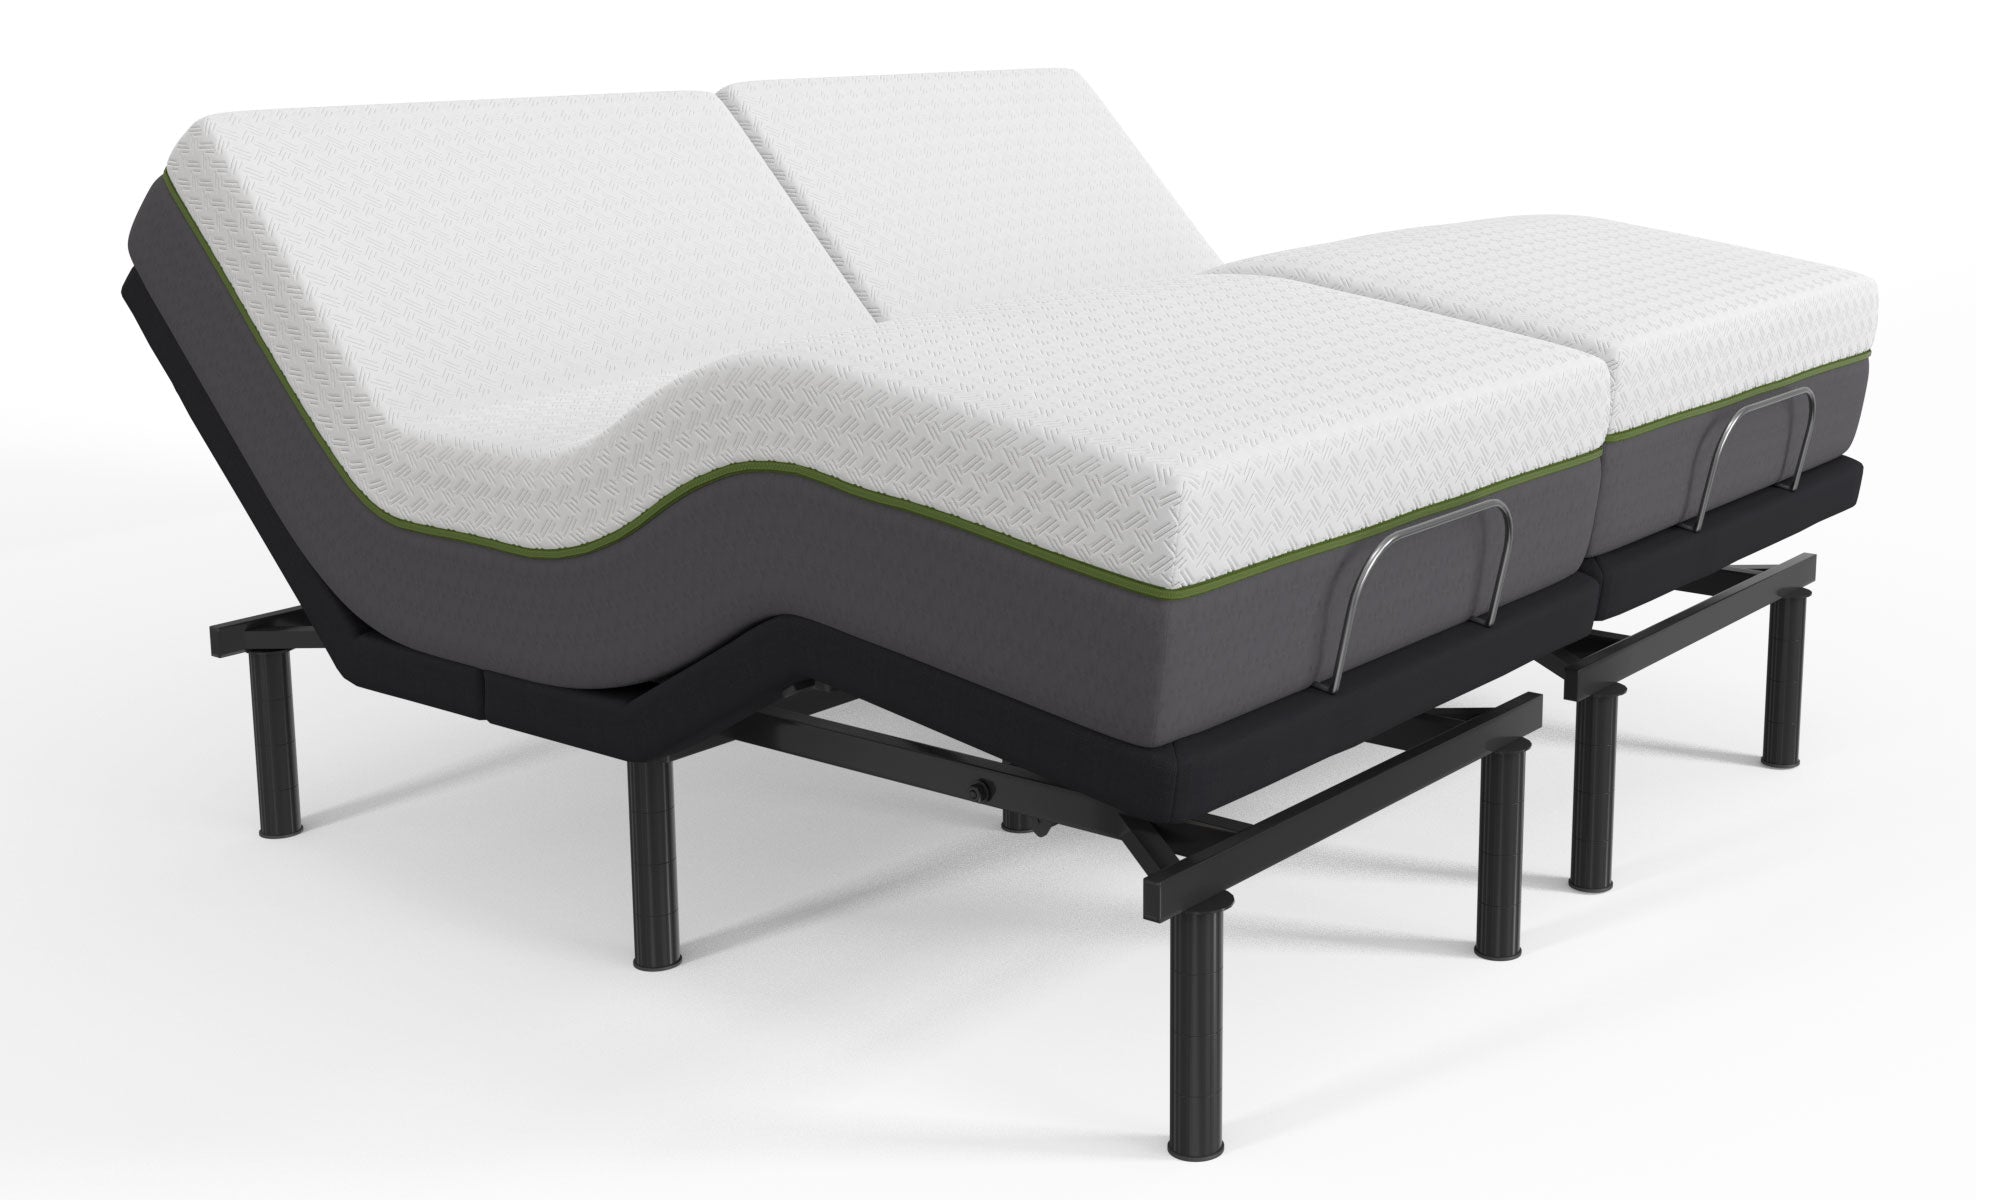 z4 Zero clearance Adjustable Frame for Storage Beds or RVs